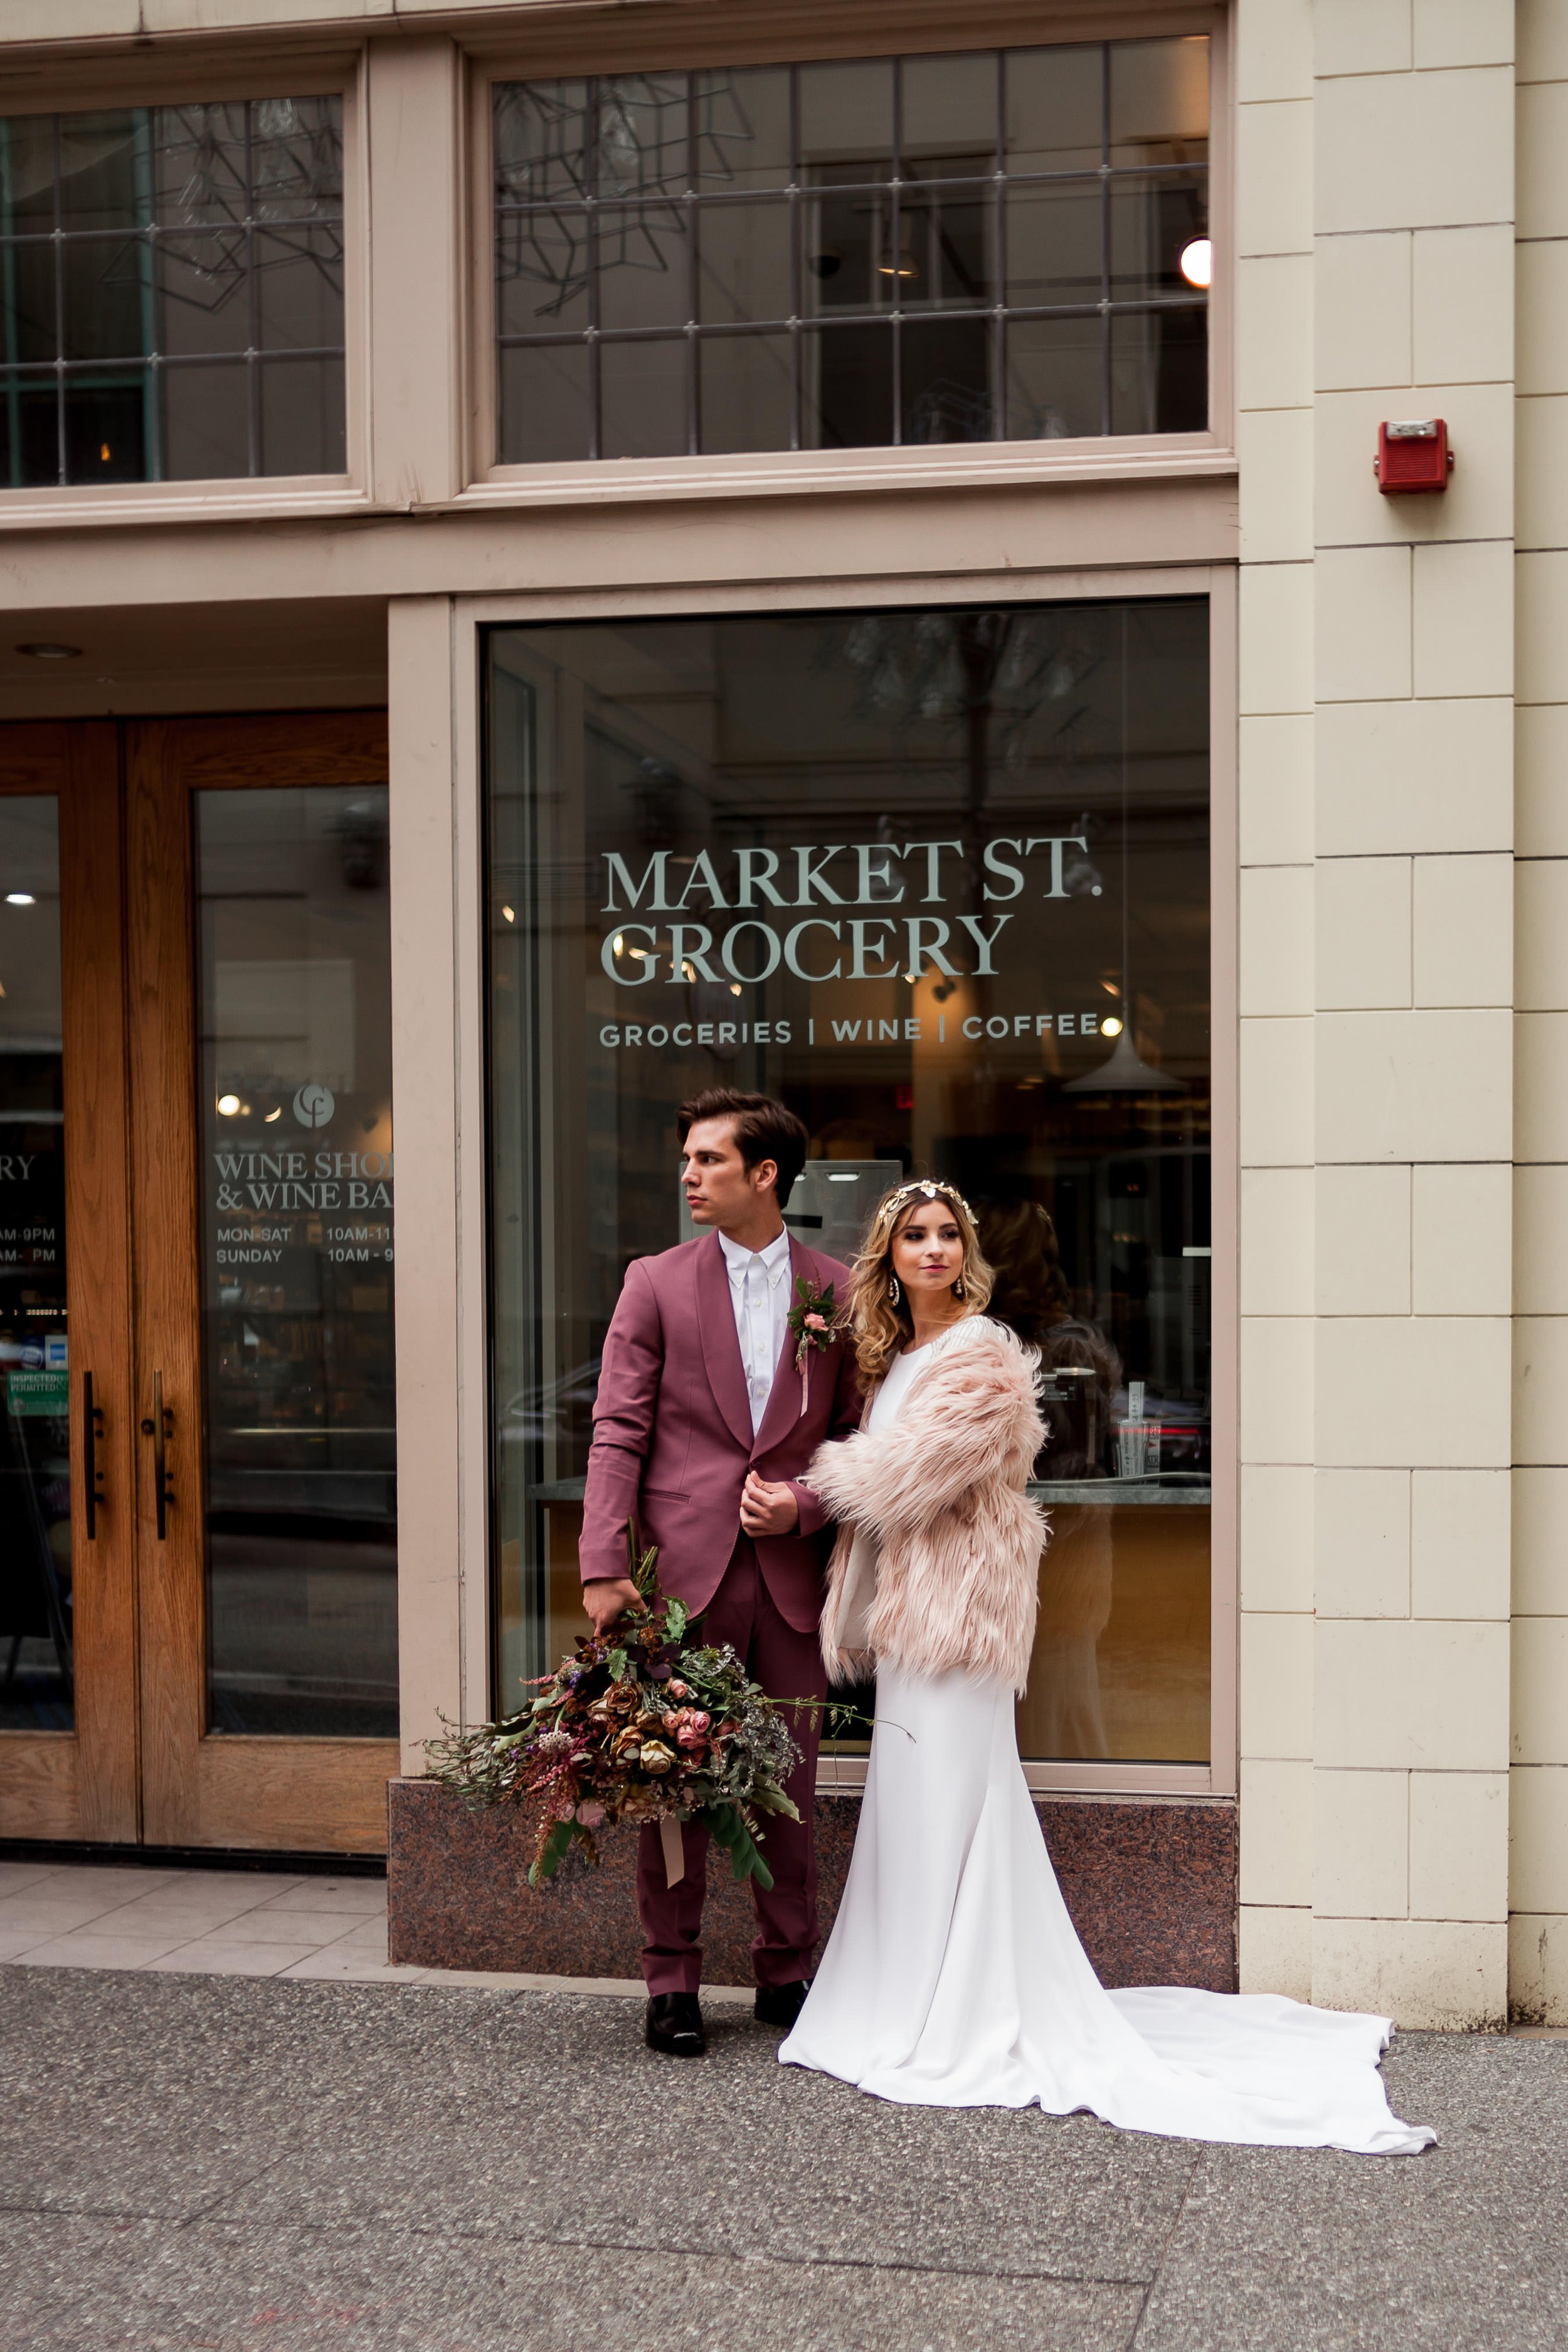 Bride and groom stand embracing each other in front of Market St. Grocery.